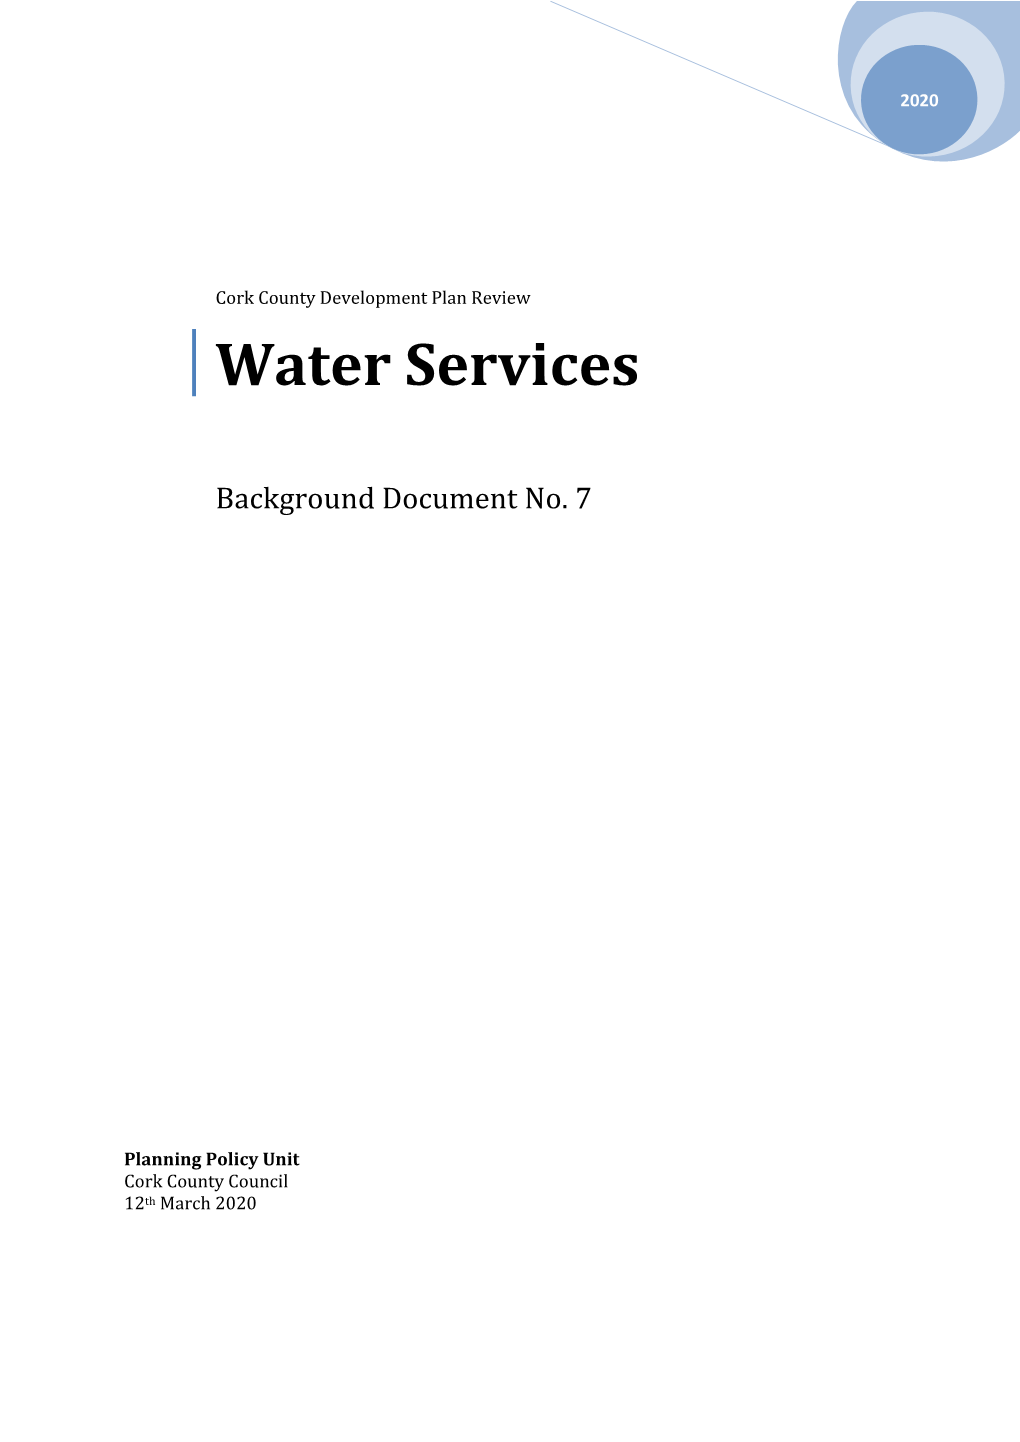 Water Services Background Document 2020